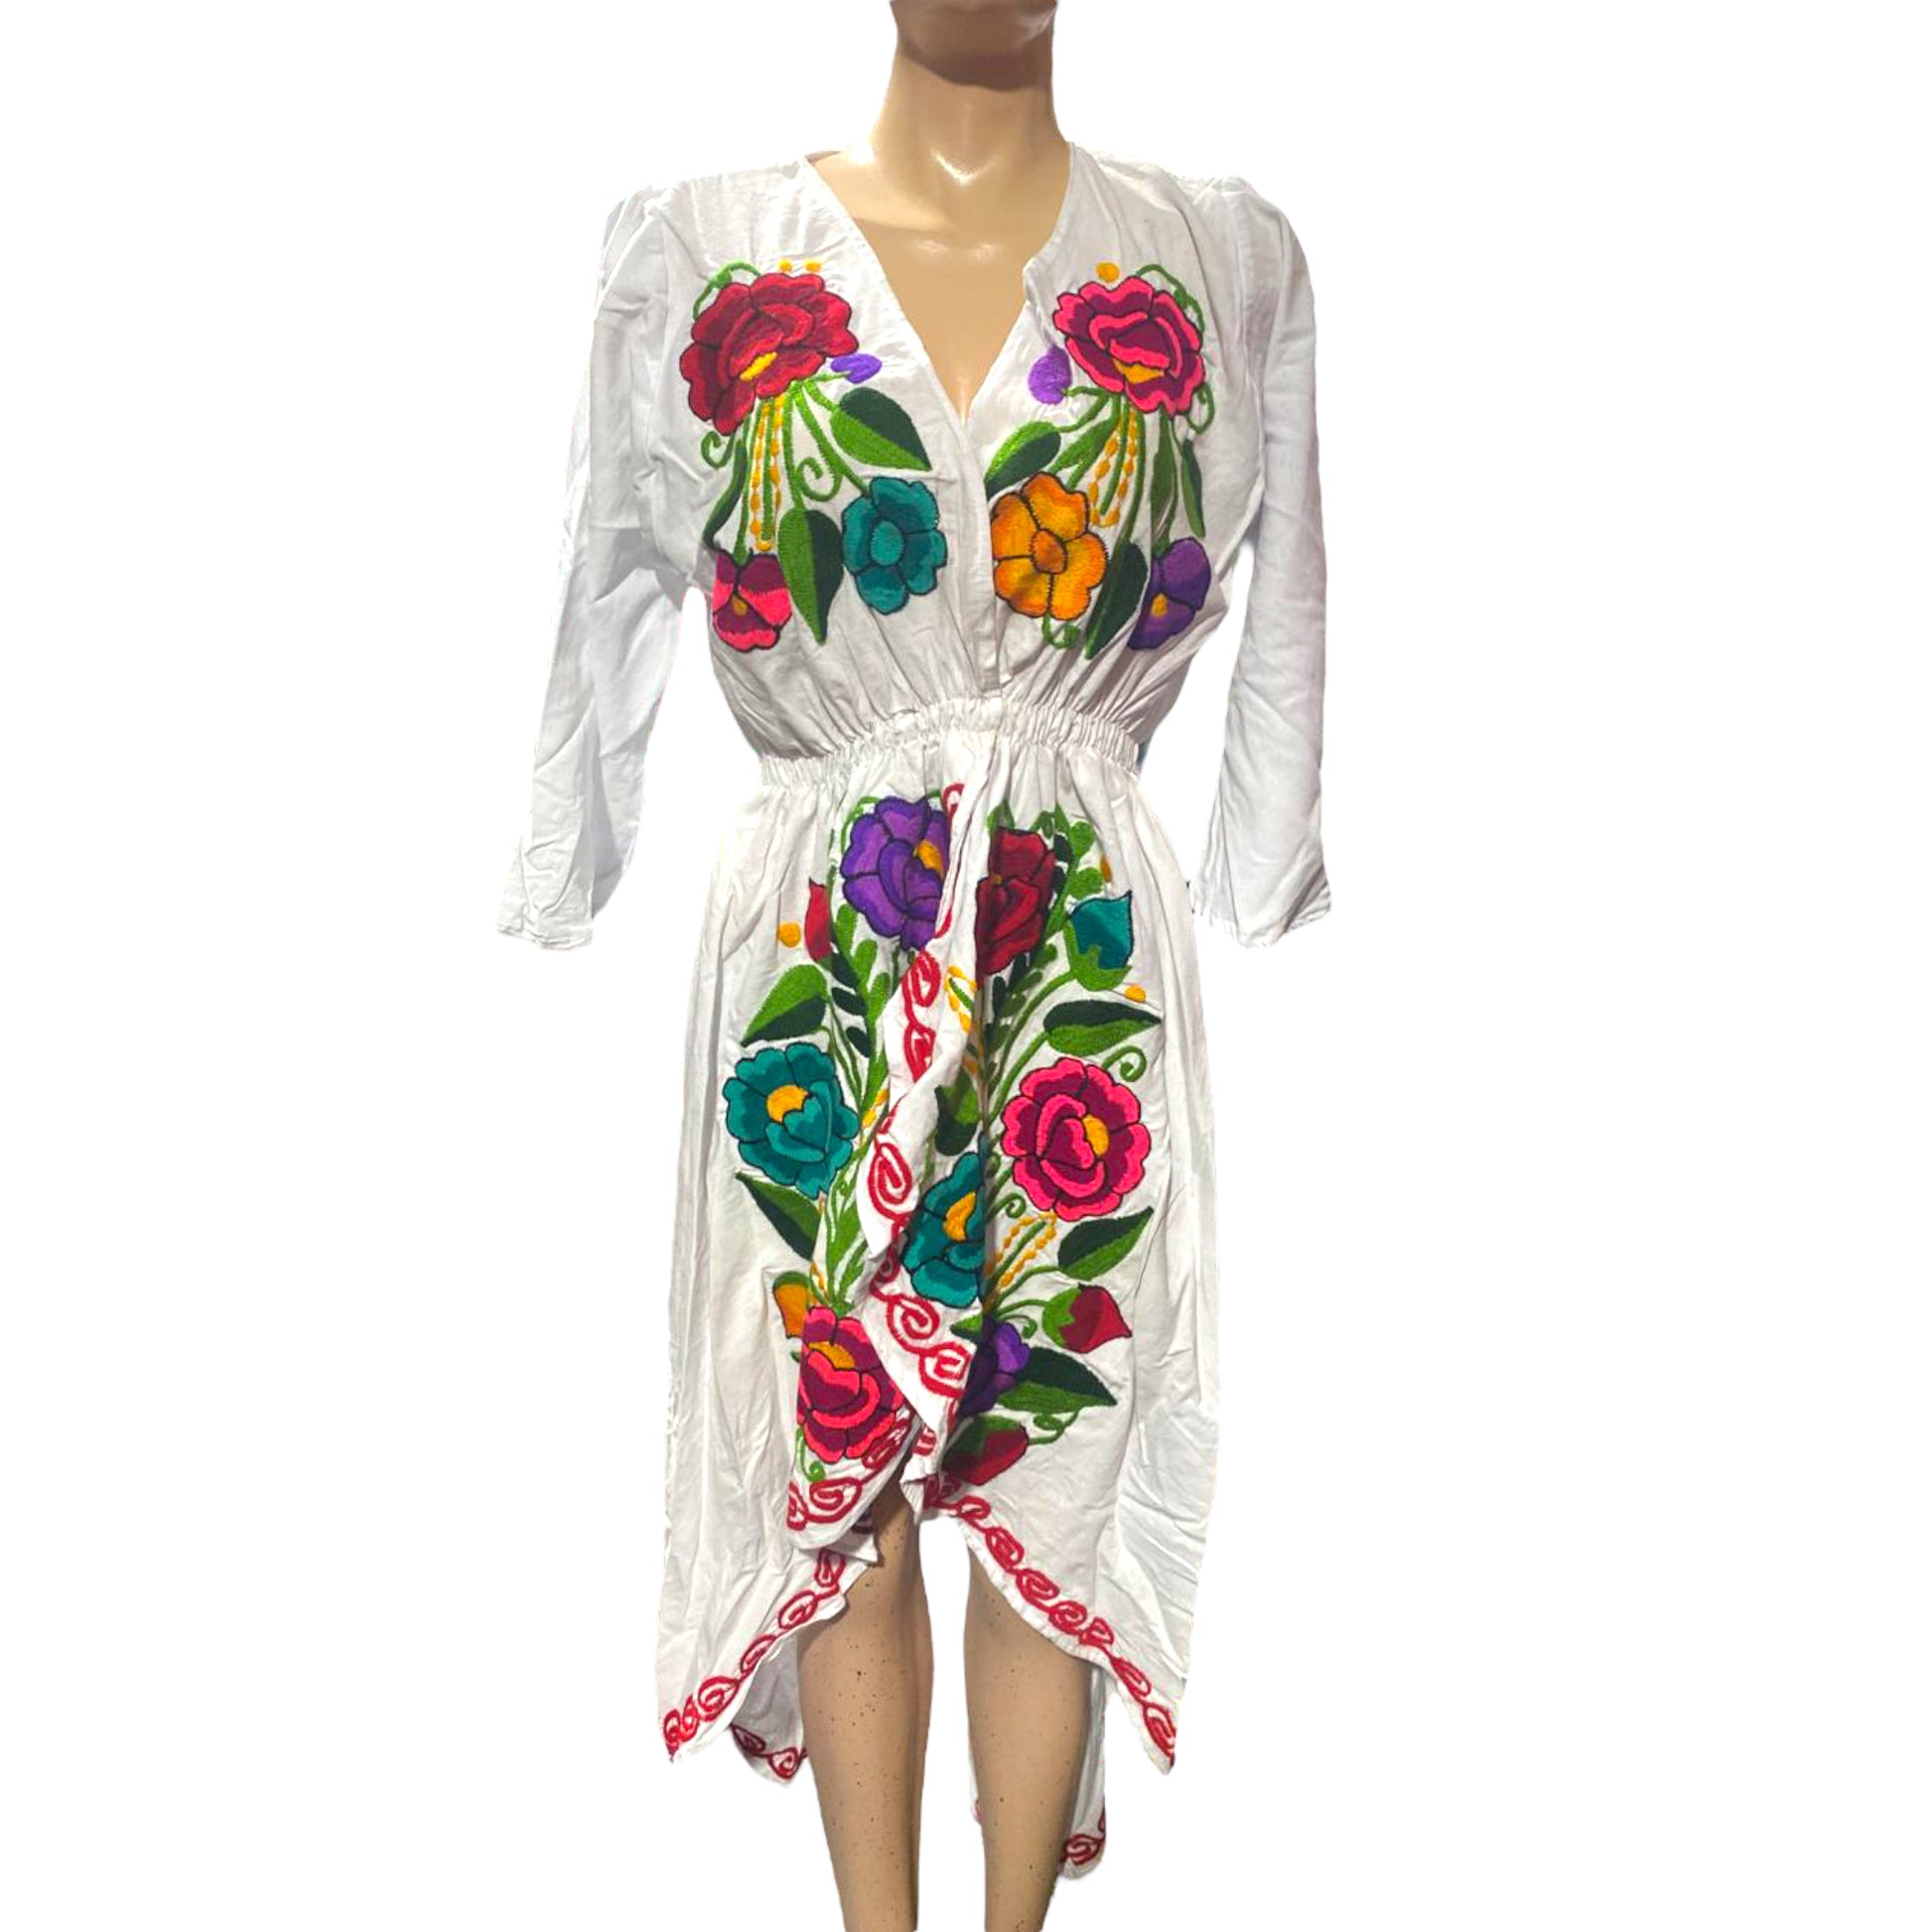 White long-tailed dress with embroidered flowers of different sizes in purple, teal, and pink. 